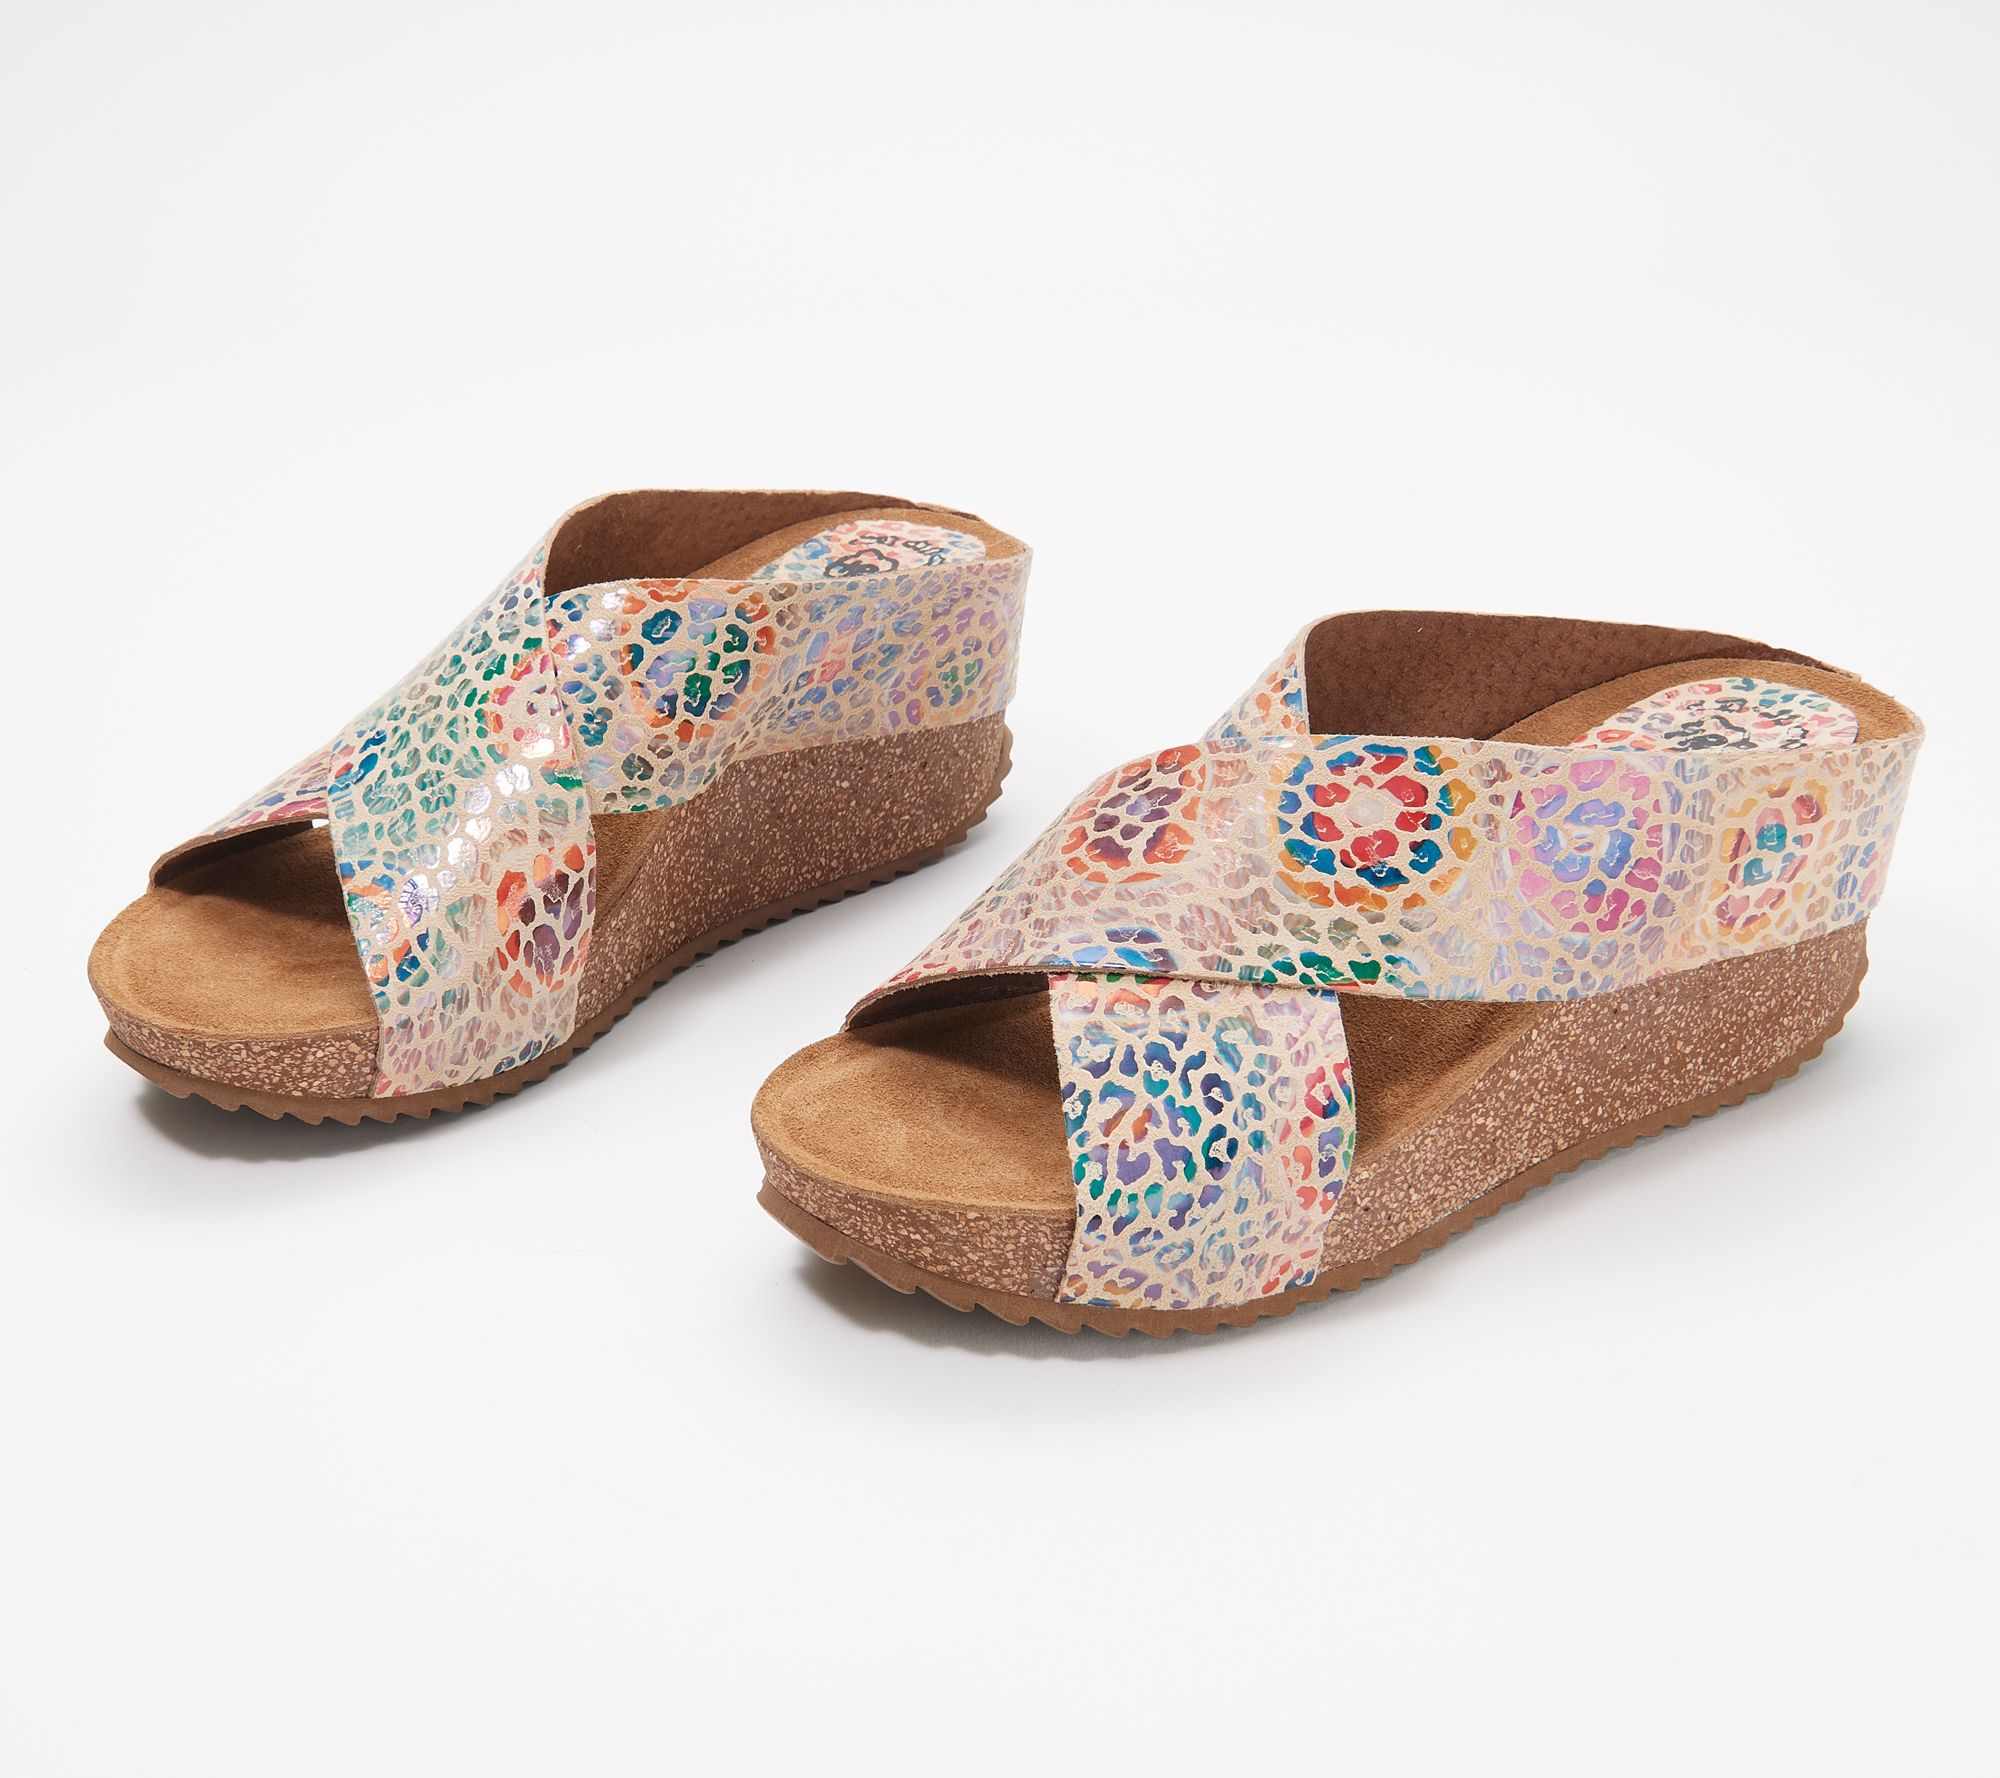 Hee Leather Printed Wedge Sandals - QVC.com